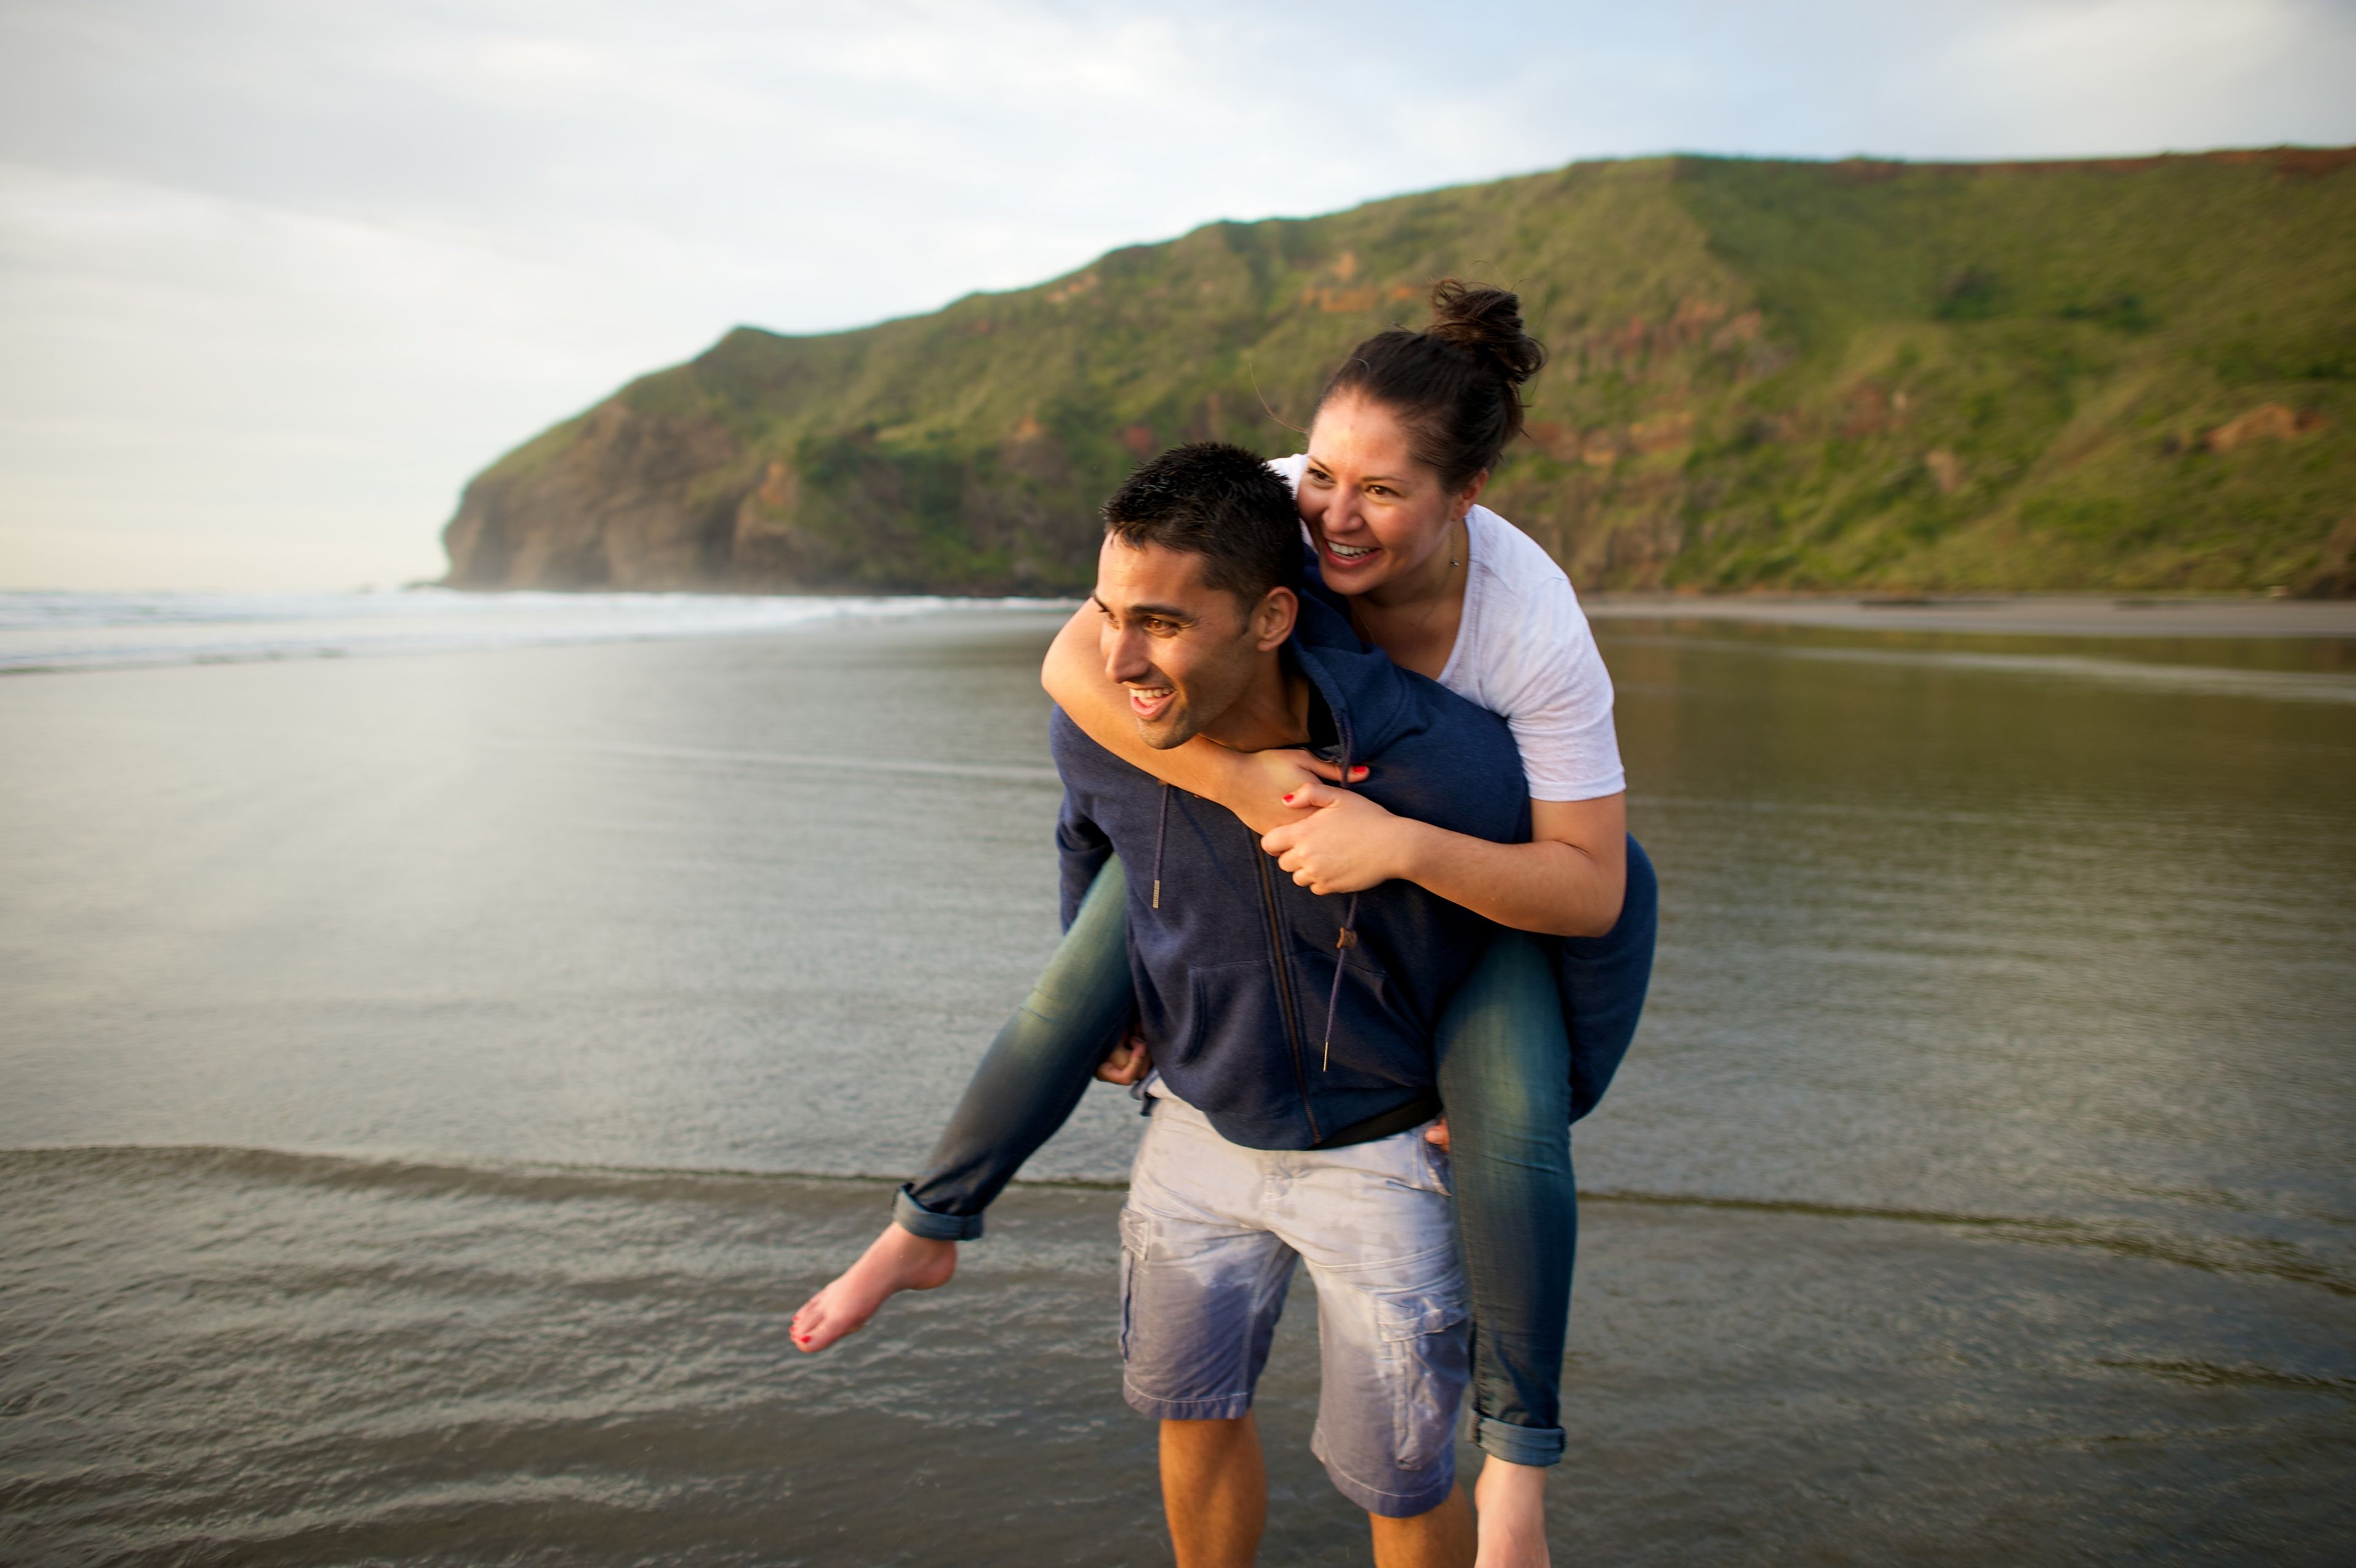 A young man carrying a young woman on his back at a beach in New Zealand.